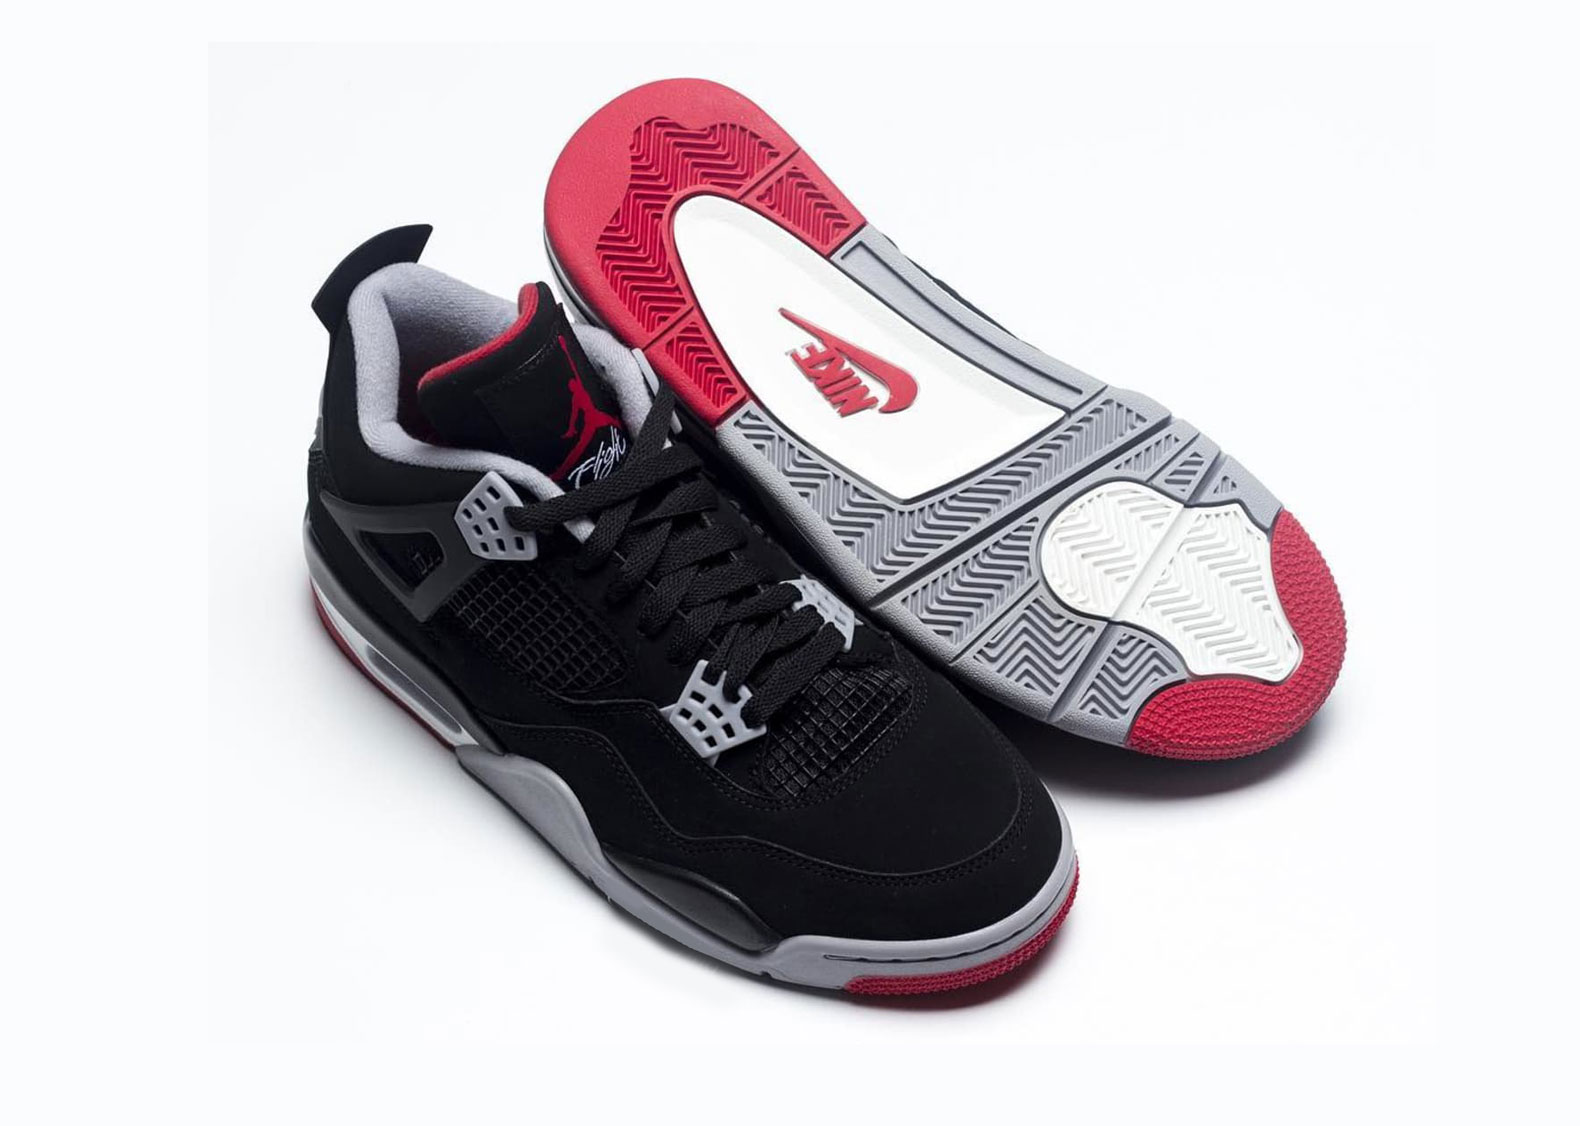 Bred 4s 11 Online Sale, TO OFF